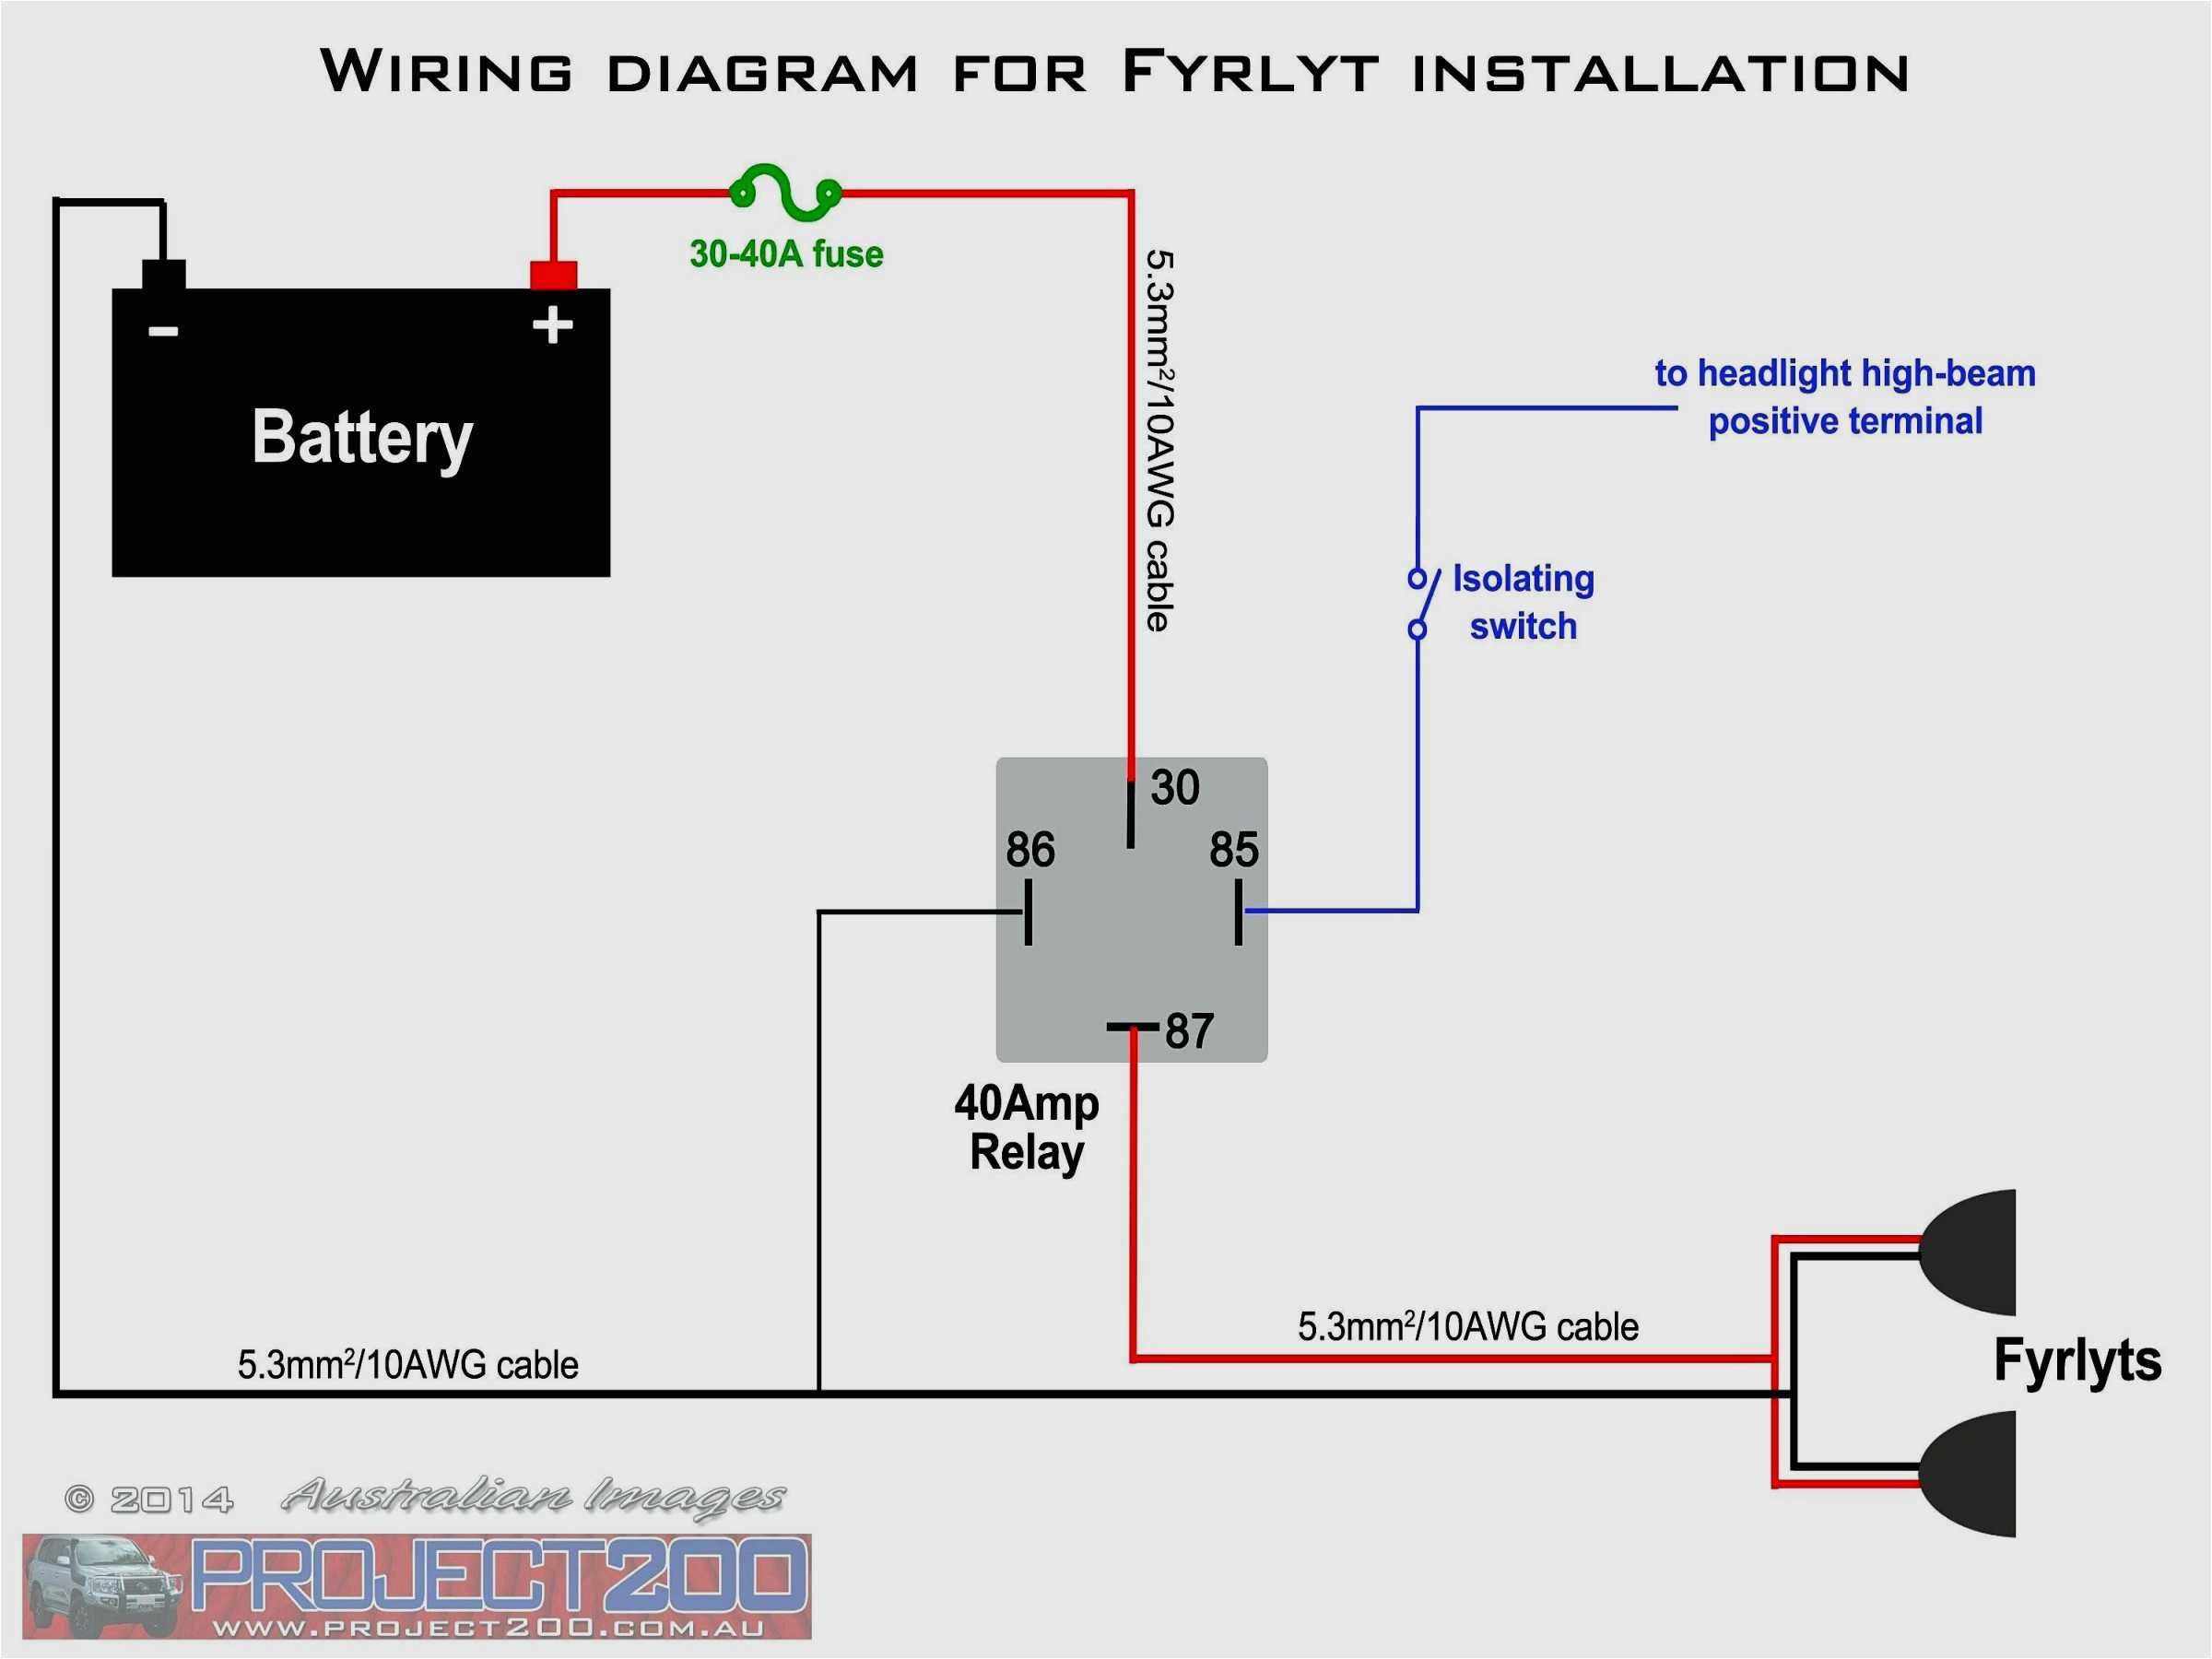 3 wire turn signal wiring diagram led lights in car wire diagram detailed schematics diagram of 3 wire turn signal wiring diagram 1 jpg